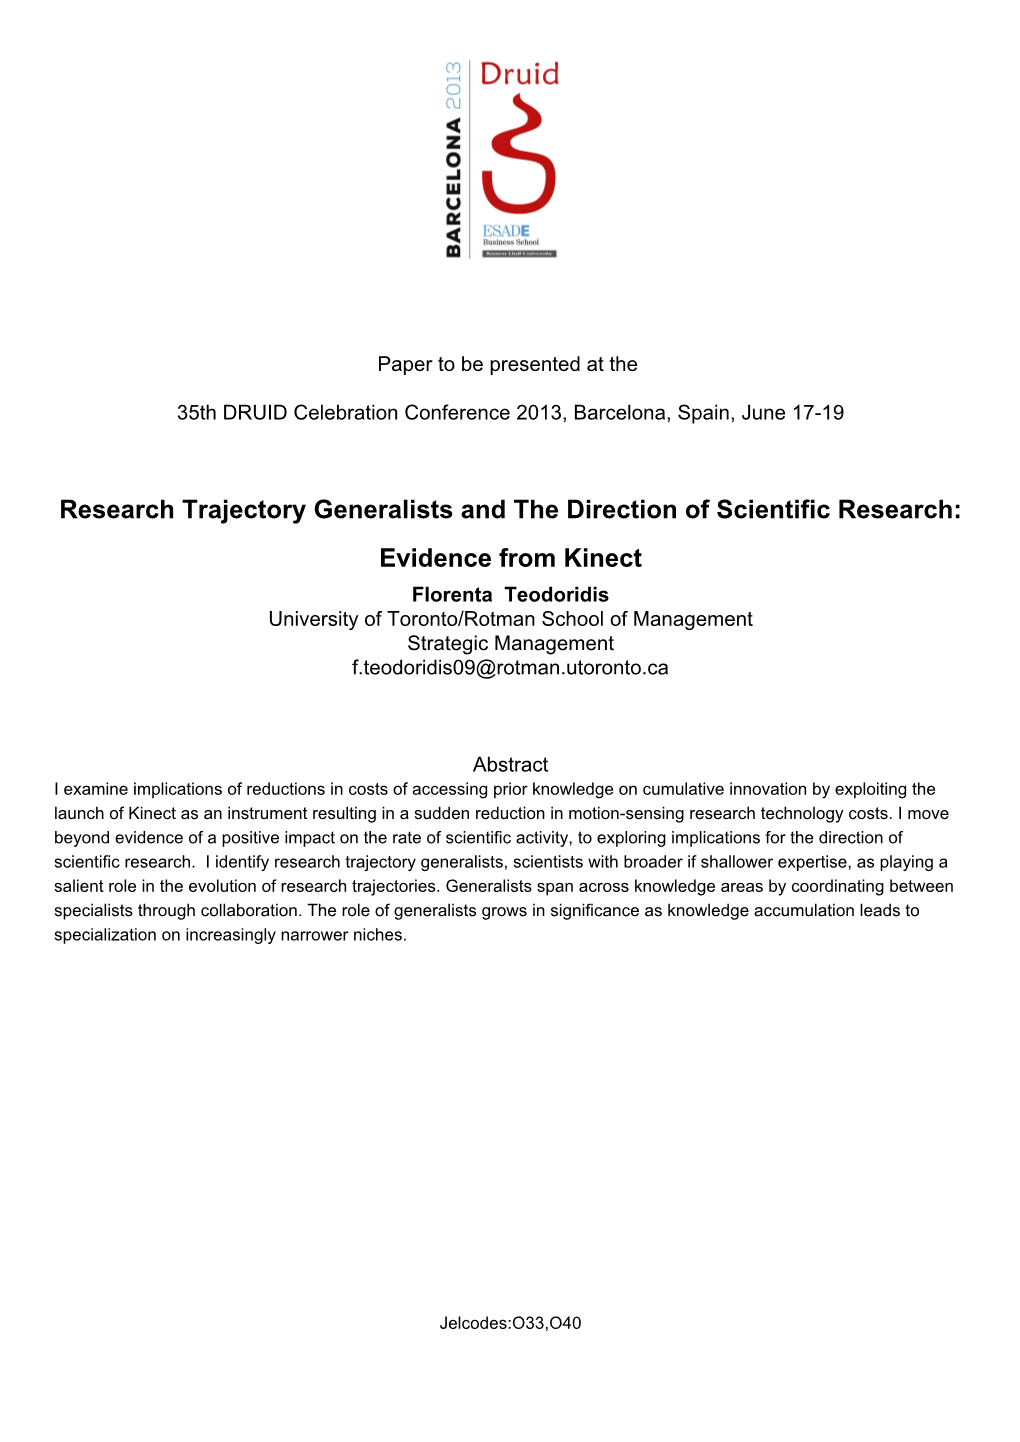 Research Trajectory Generalists and the Direction of Scientific